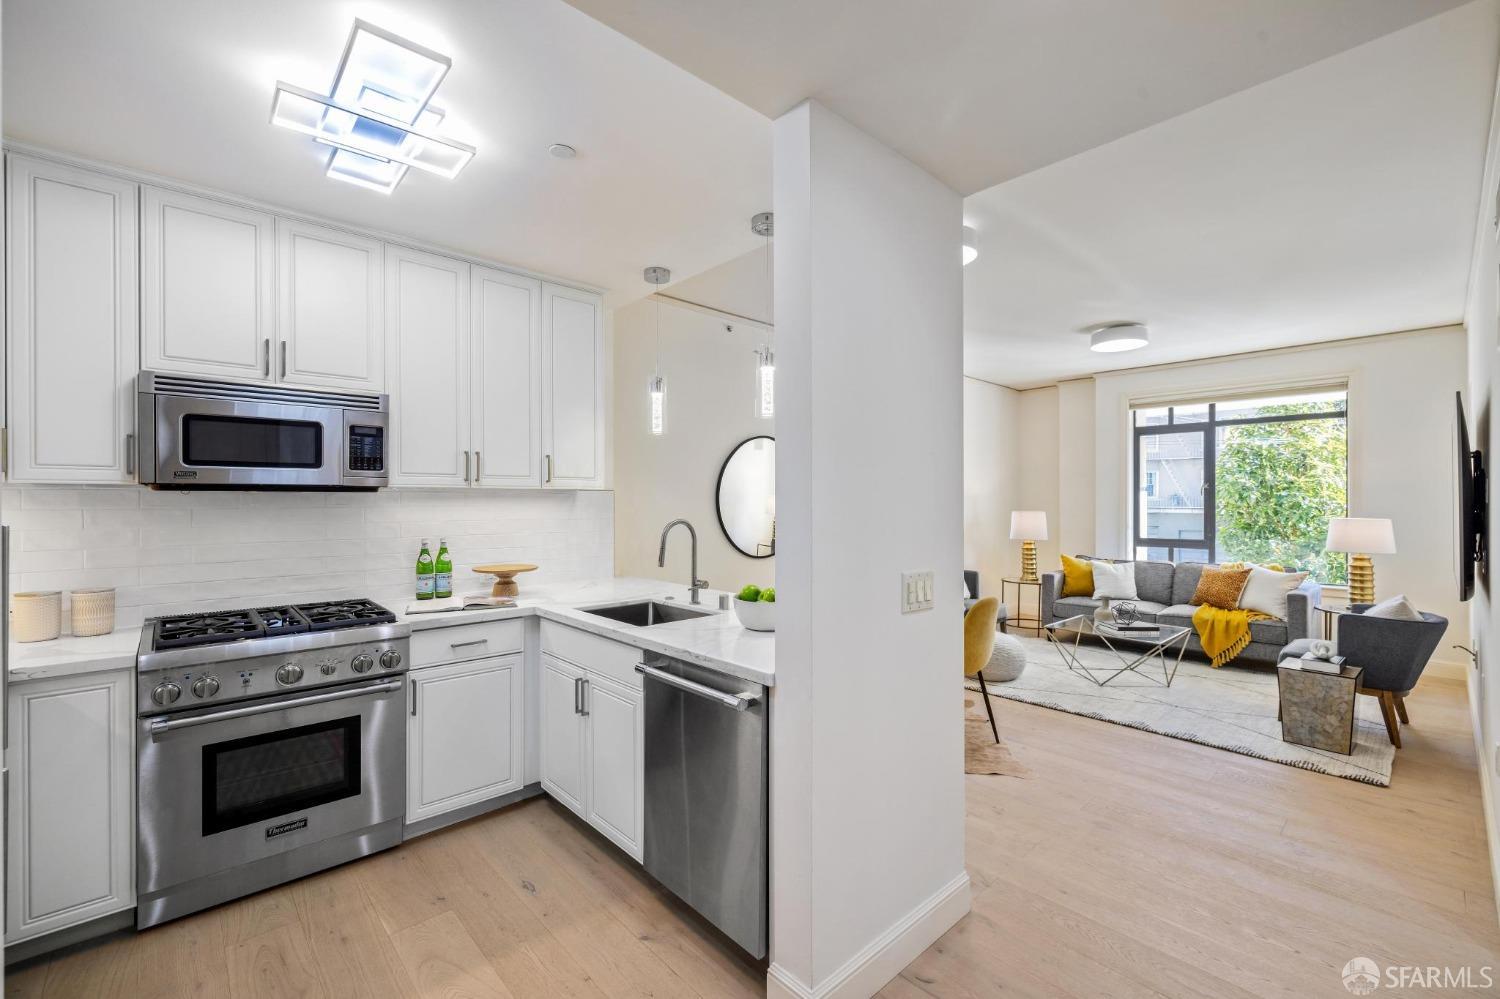 Photo of 1501 Greenwich St #202 in San Francisco, CA